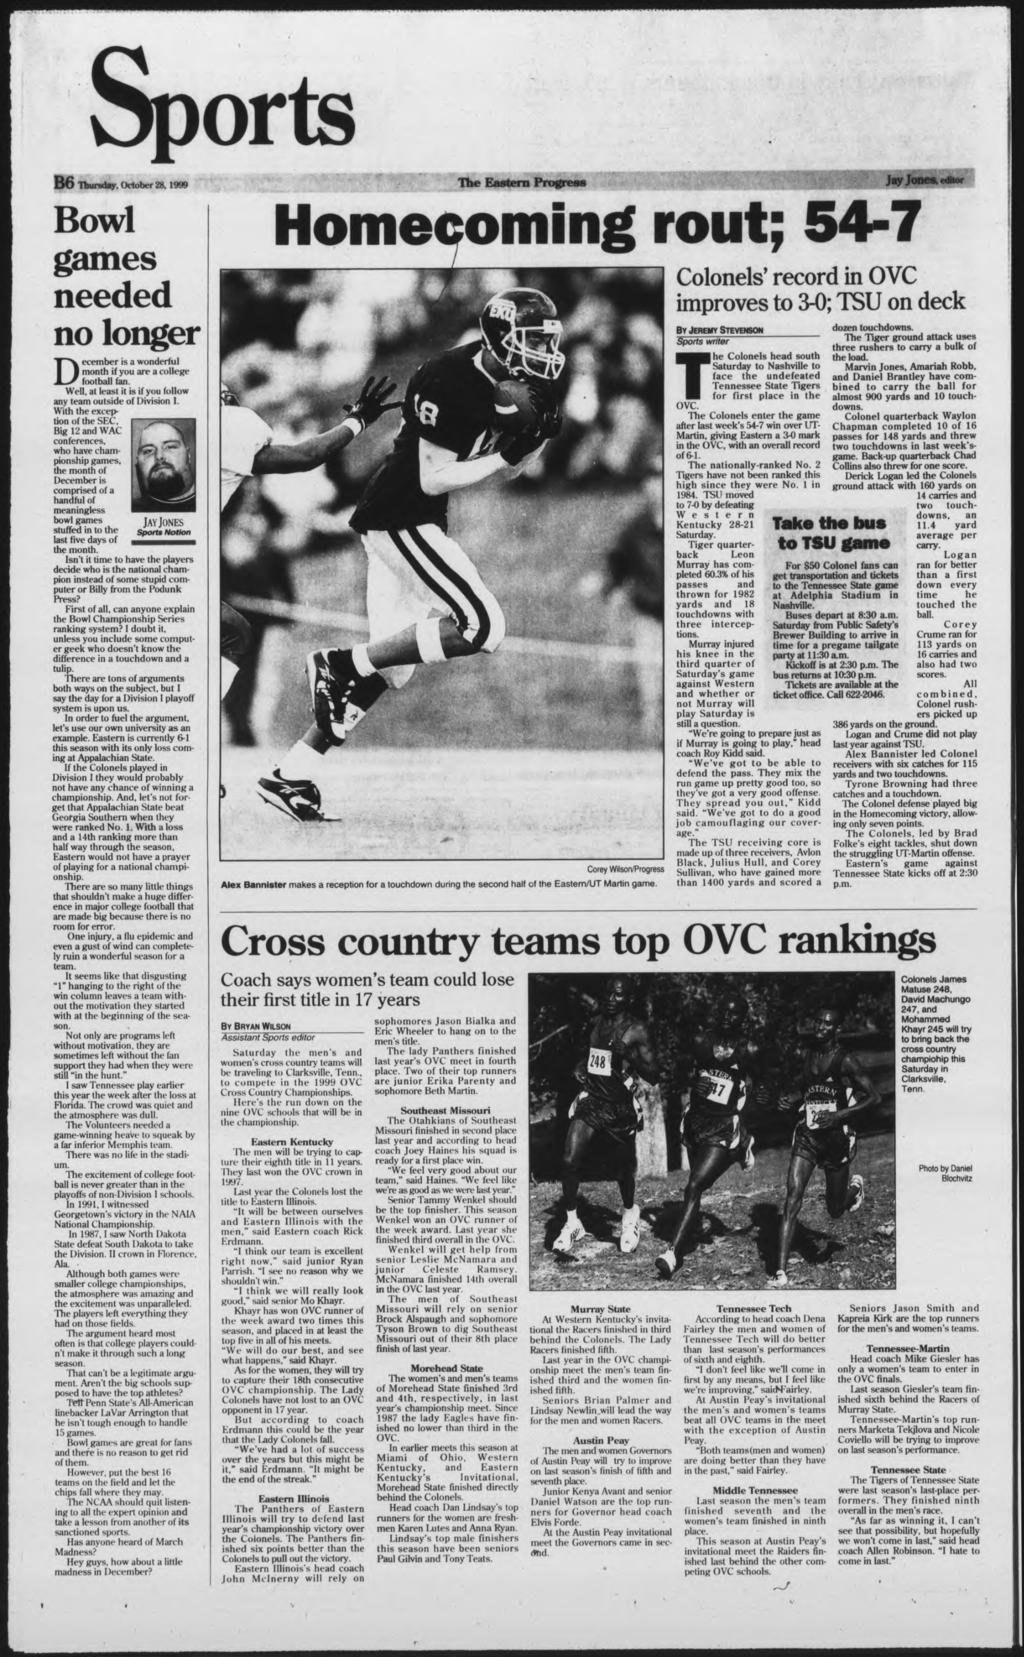 B6 Thursday. October 28. 1999 Bowl games needed no longer December is a wonderful month if you are a college football fan. Well, at least it is if you follow any team outside of Division I.